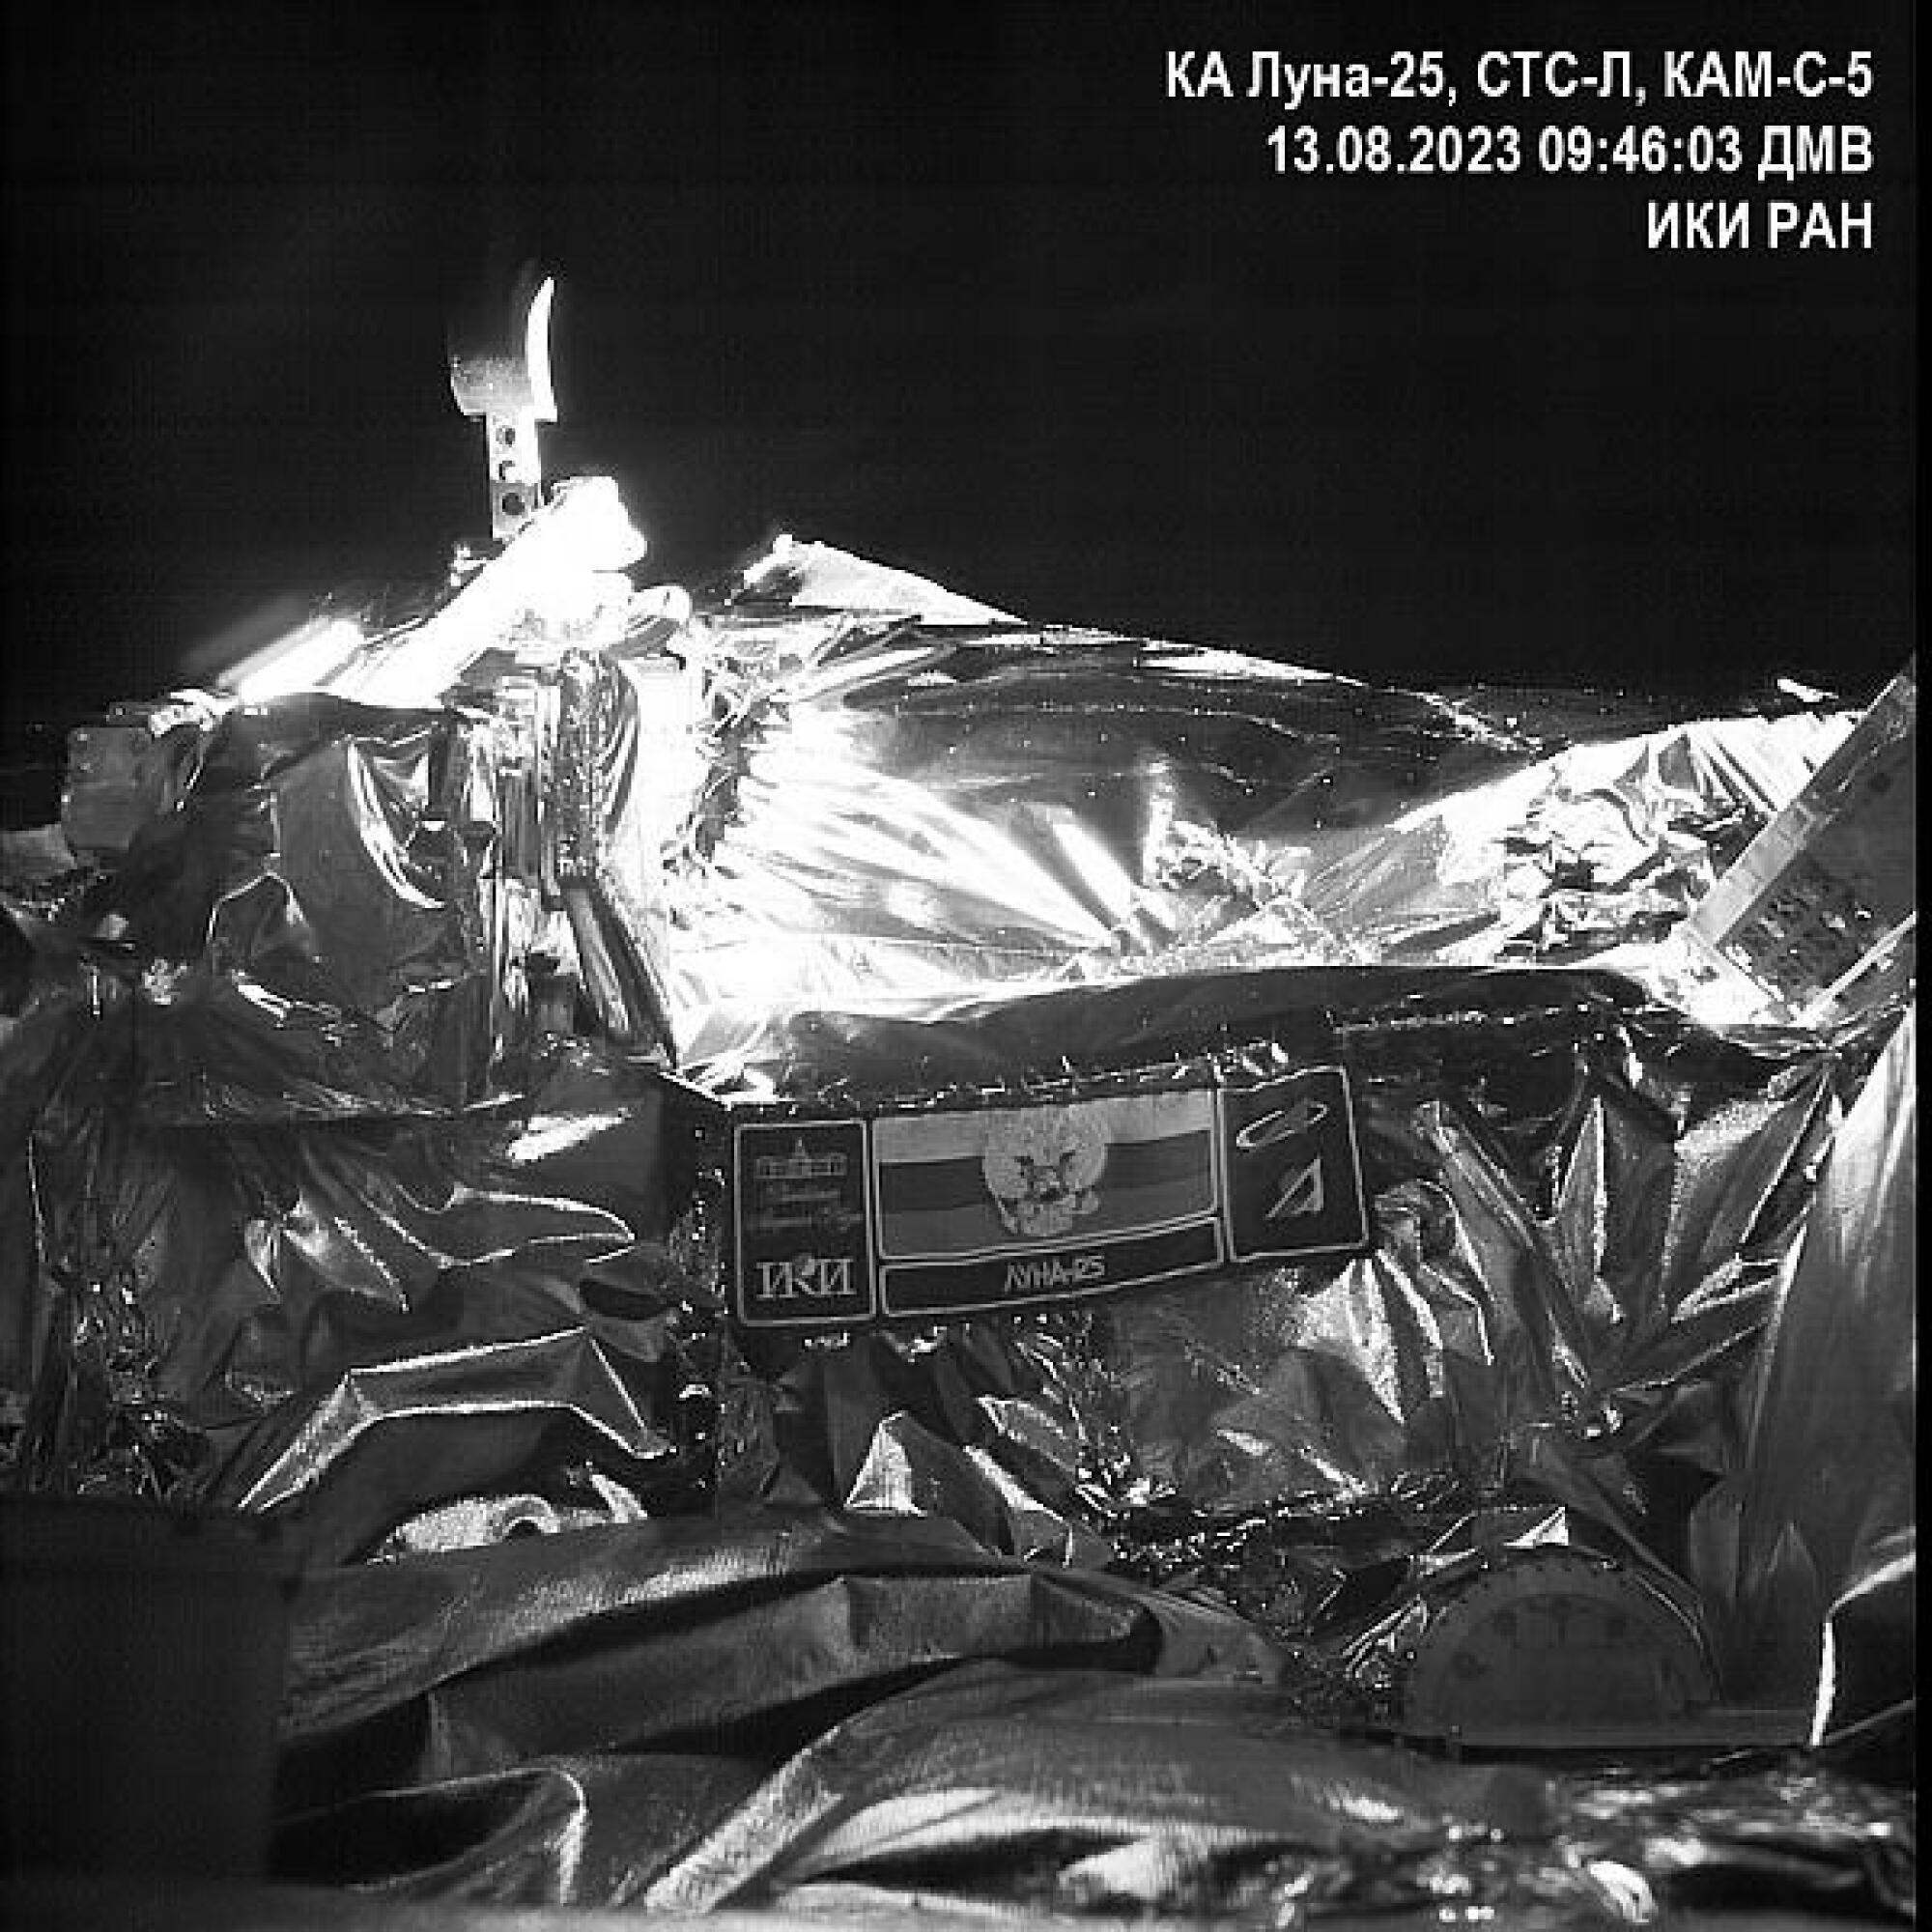 In this photo of Luna-25 you can see the mission logo and parts of the lunar manipulator complex (LMK), which will excavate the lunar surface.